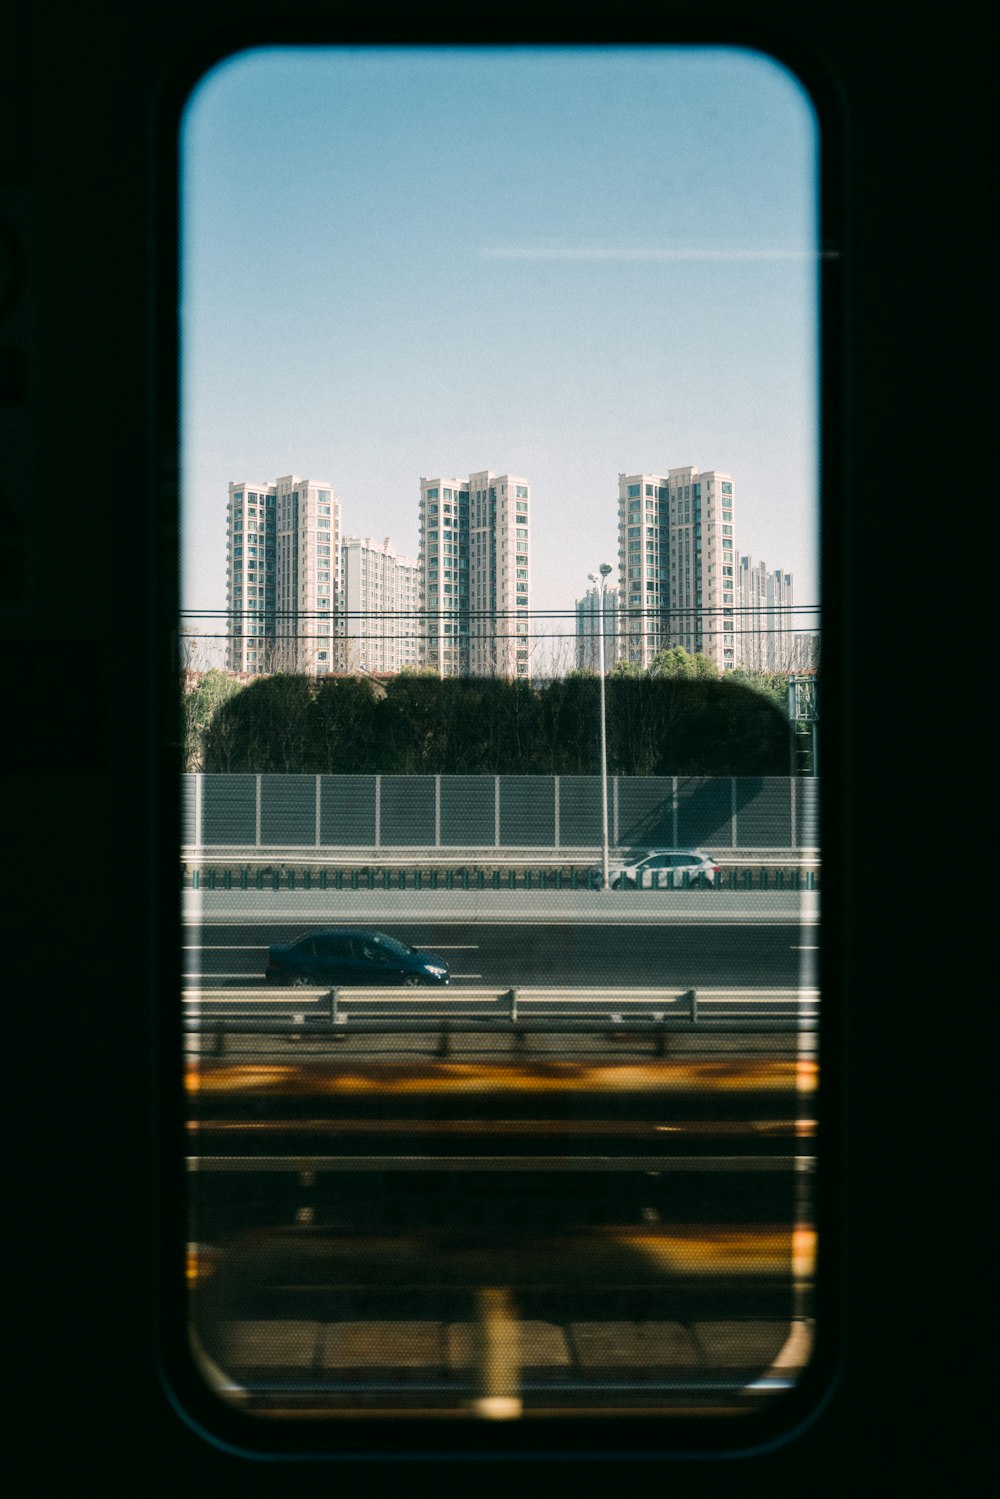 a view of a city from a train window